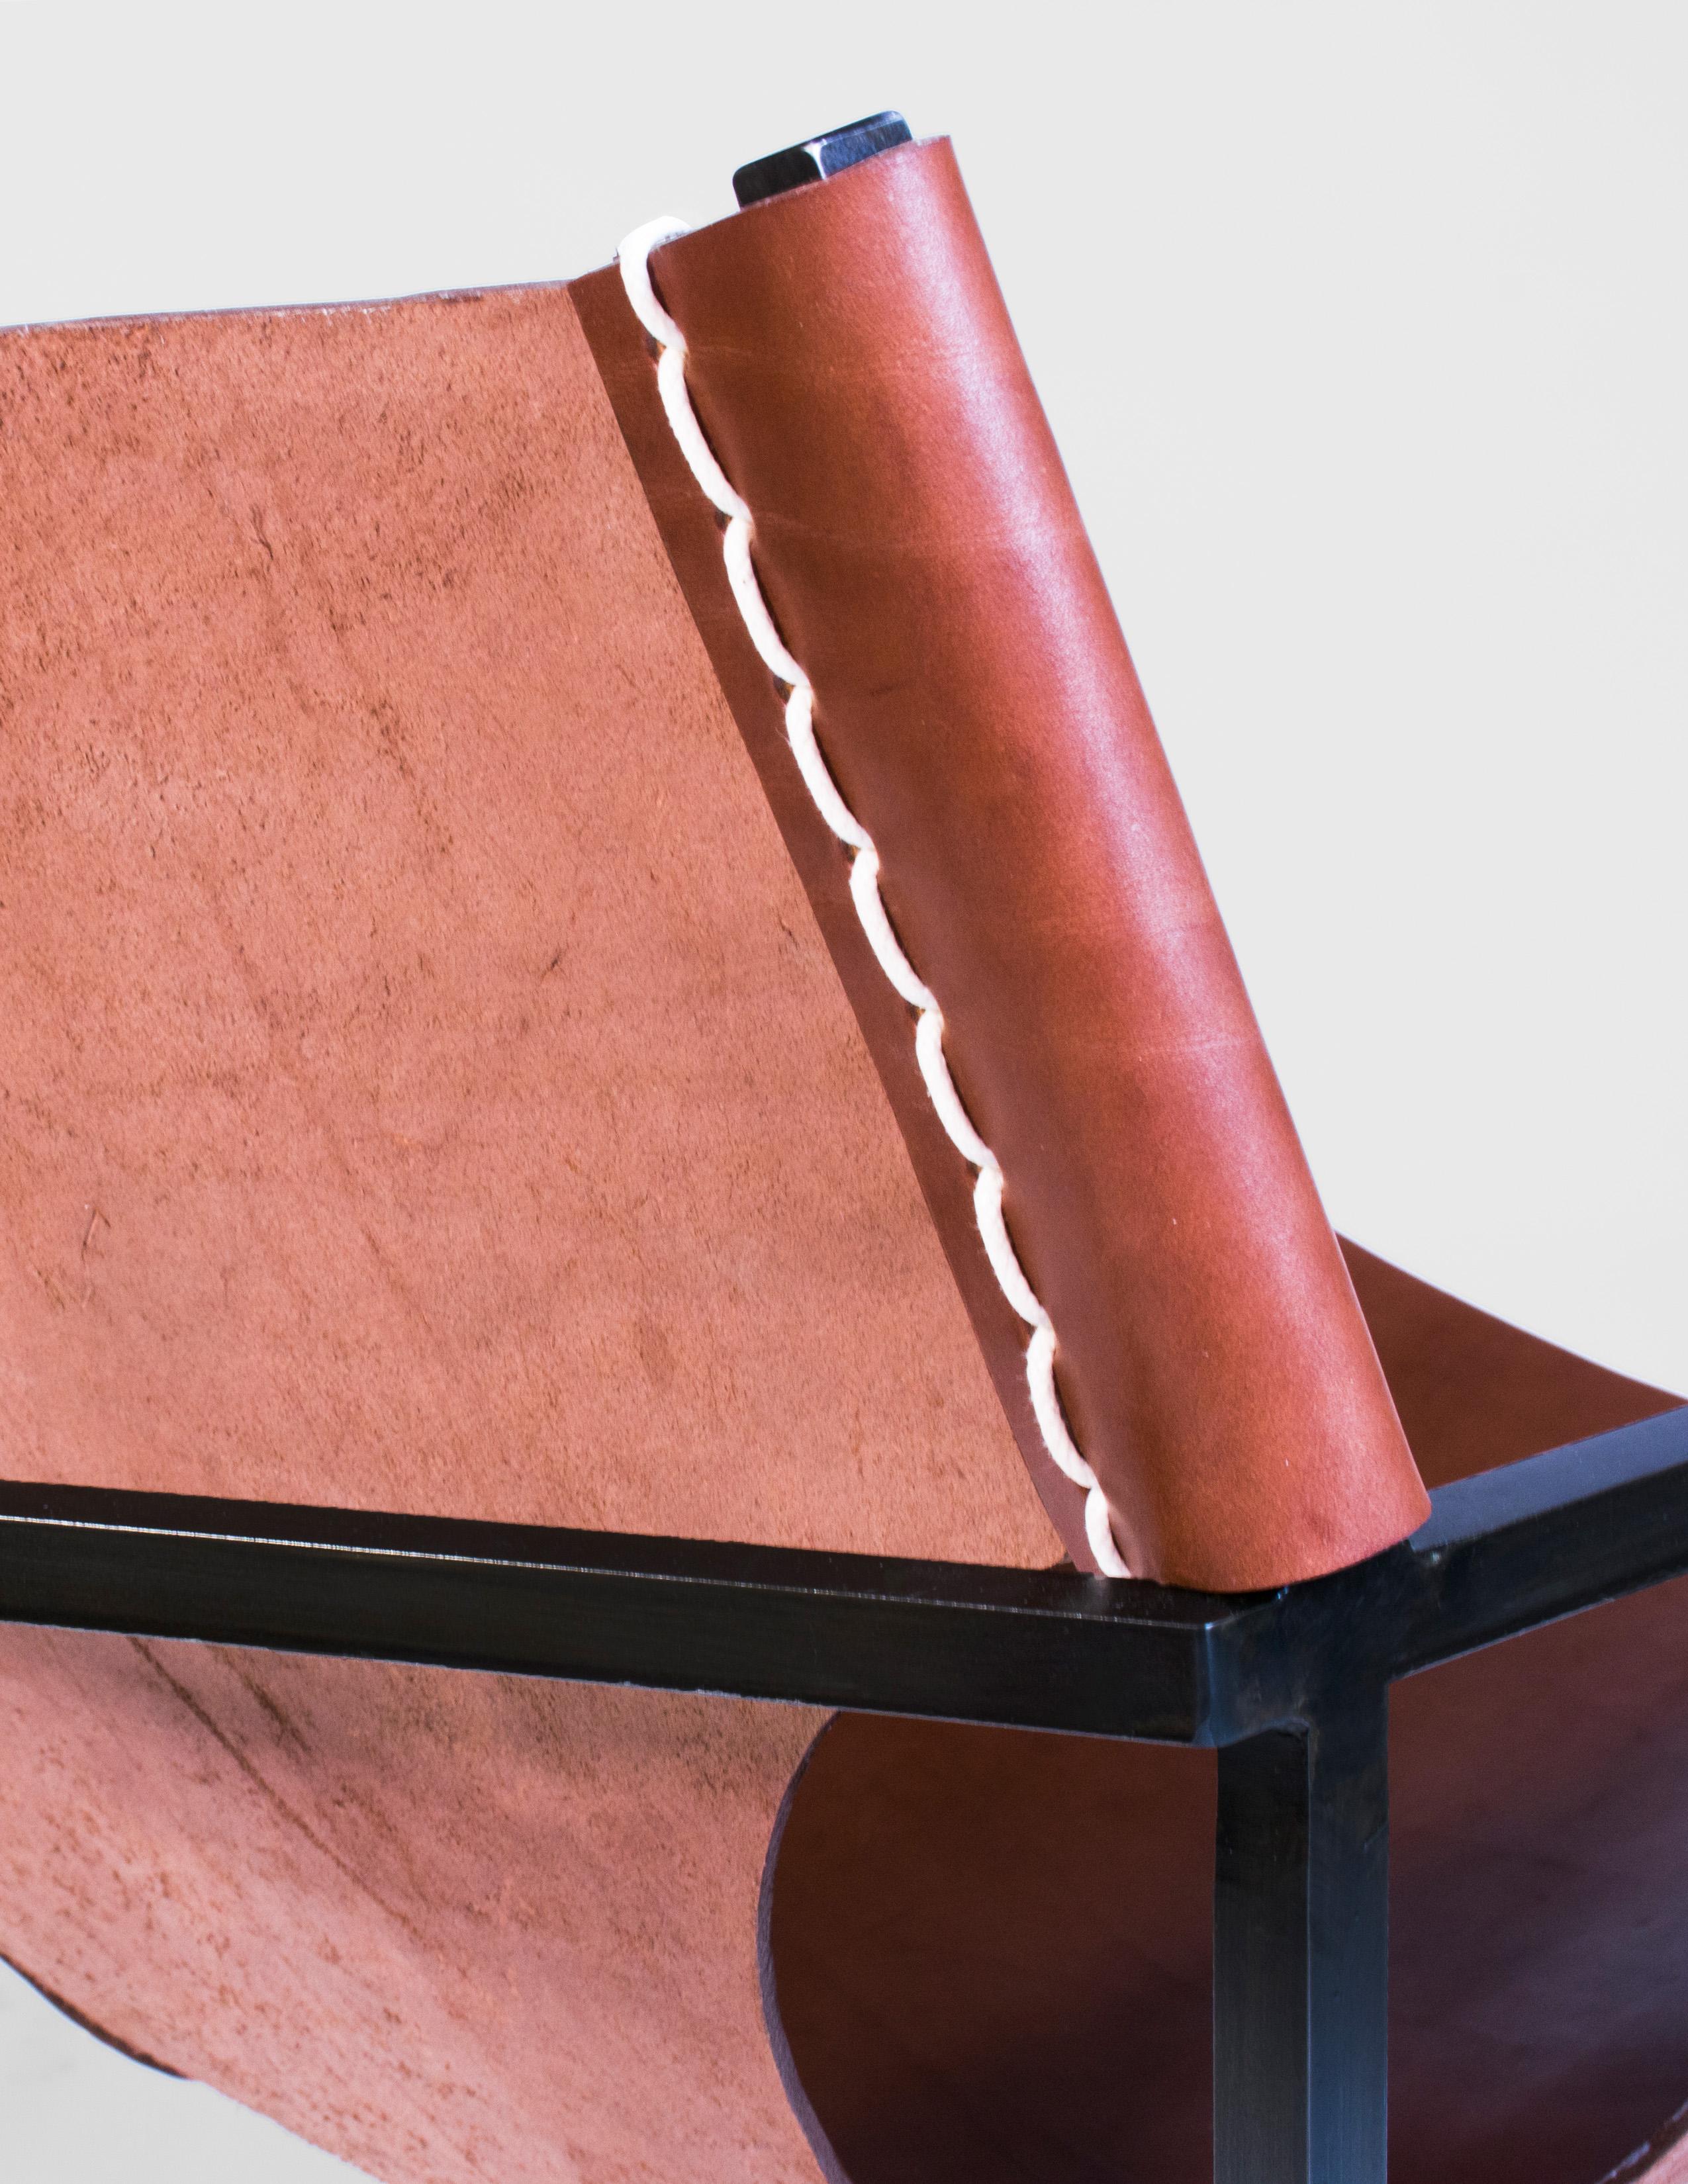 Handmade leather sling chair in tobacco leather fixed to a blackened steel frame with a heavy saddle stitch and hammered brass rivets. Ergonomically designed for comfort. Designed and made to order in New York.

This piece is crafted using heavy